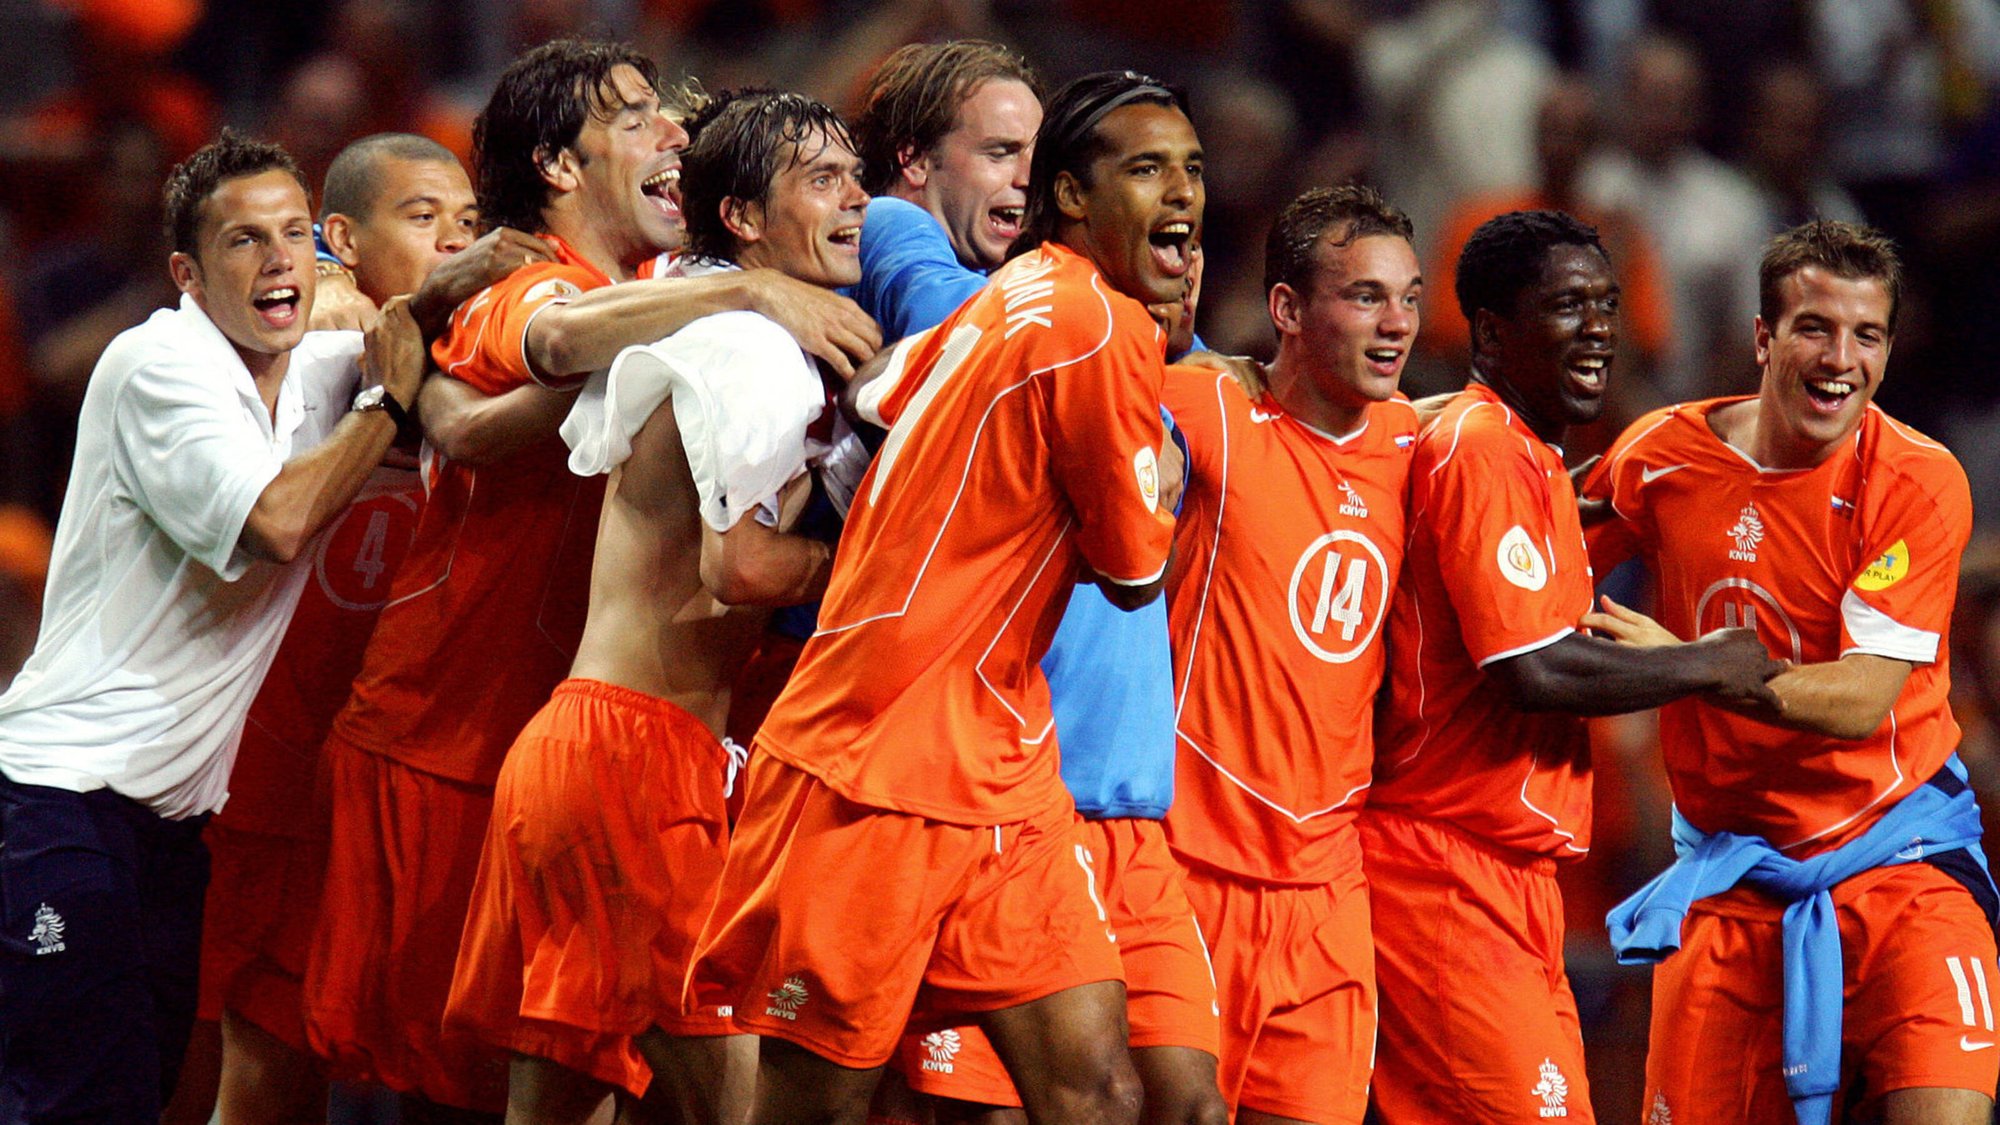 Celebrating players of the Dutch national football team